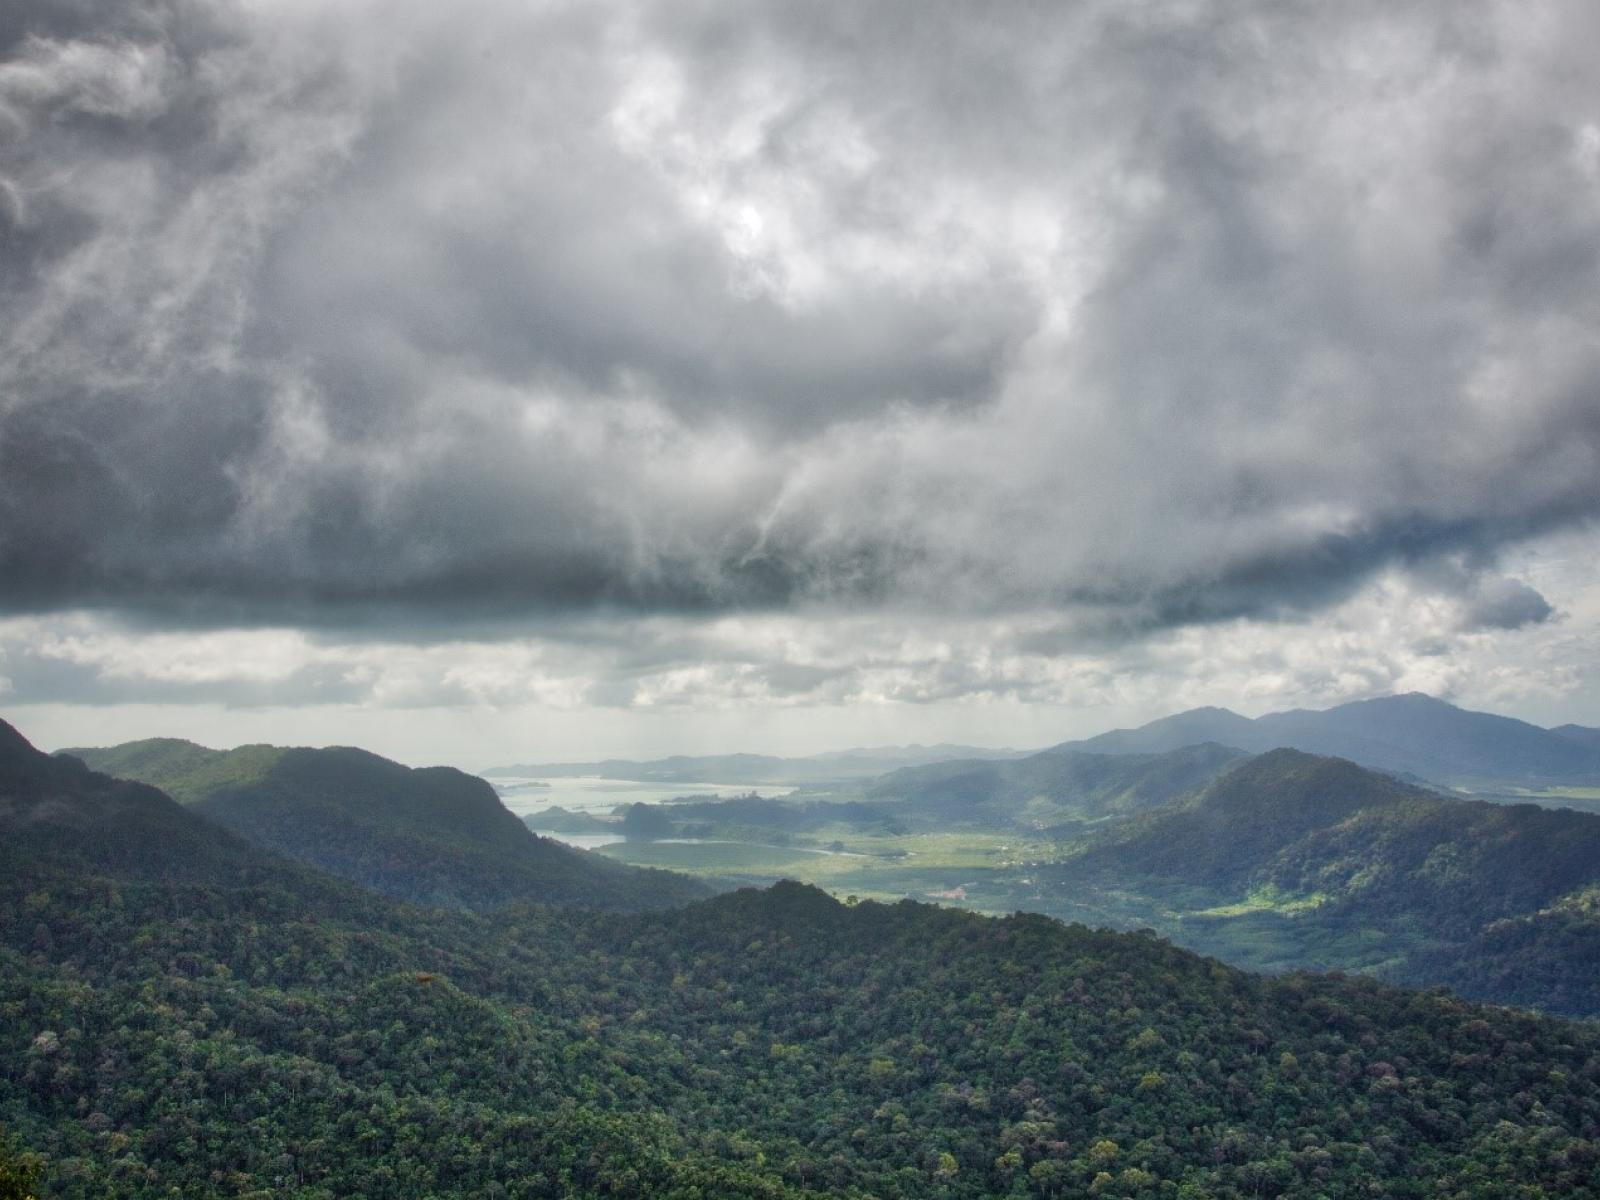 Photograph of tropical land with moody clouds